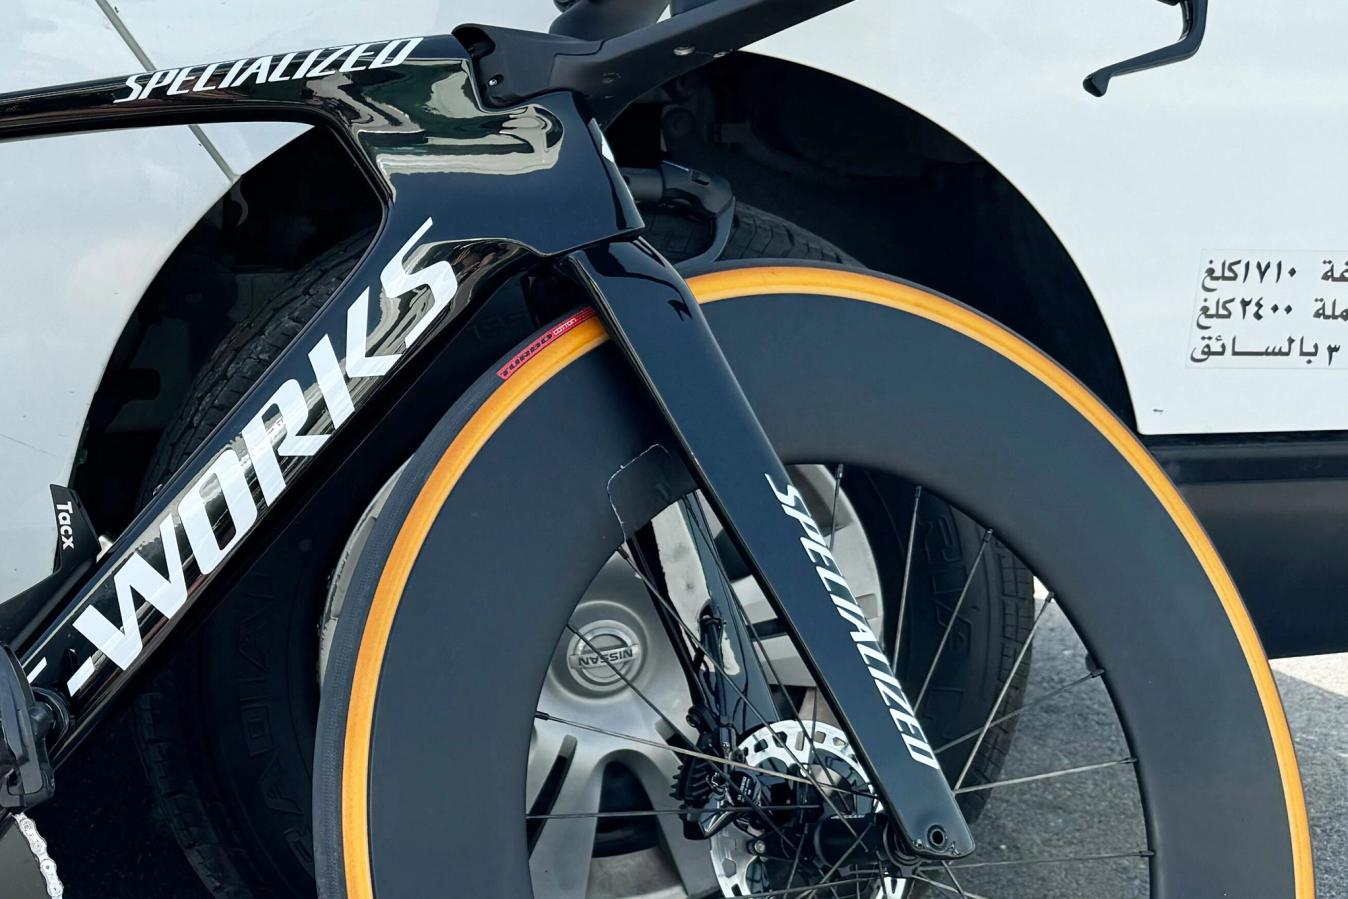 Time trial bikes go through hundreds to thousands of hours of testing in wind tunnels and through CFD. All of that aerodynamic fine-tuning can be hampered by less aerodynamic components. One problem for teams is the valve holes in wheels but Soudal Quick-Step had a simple solution: tape